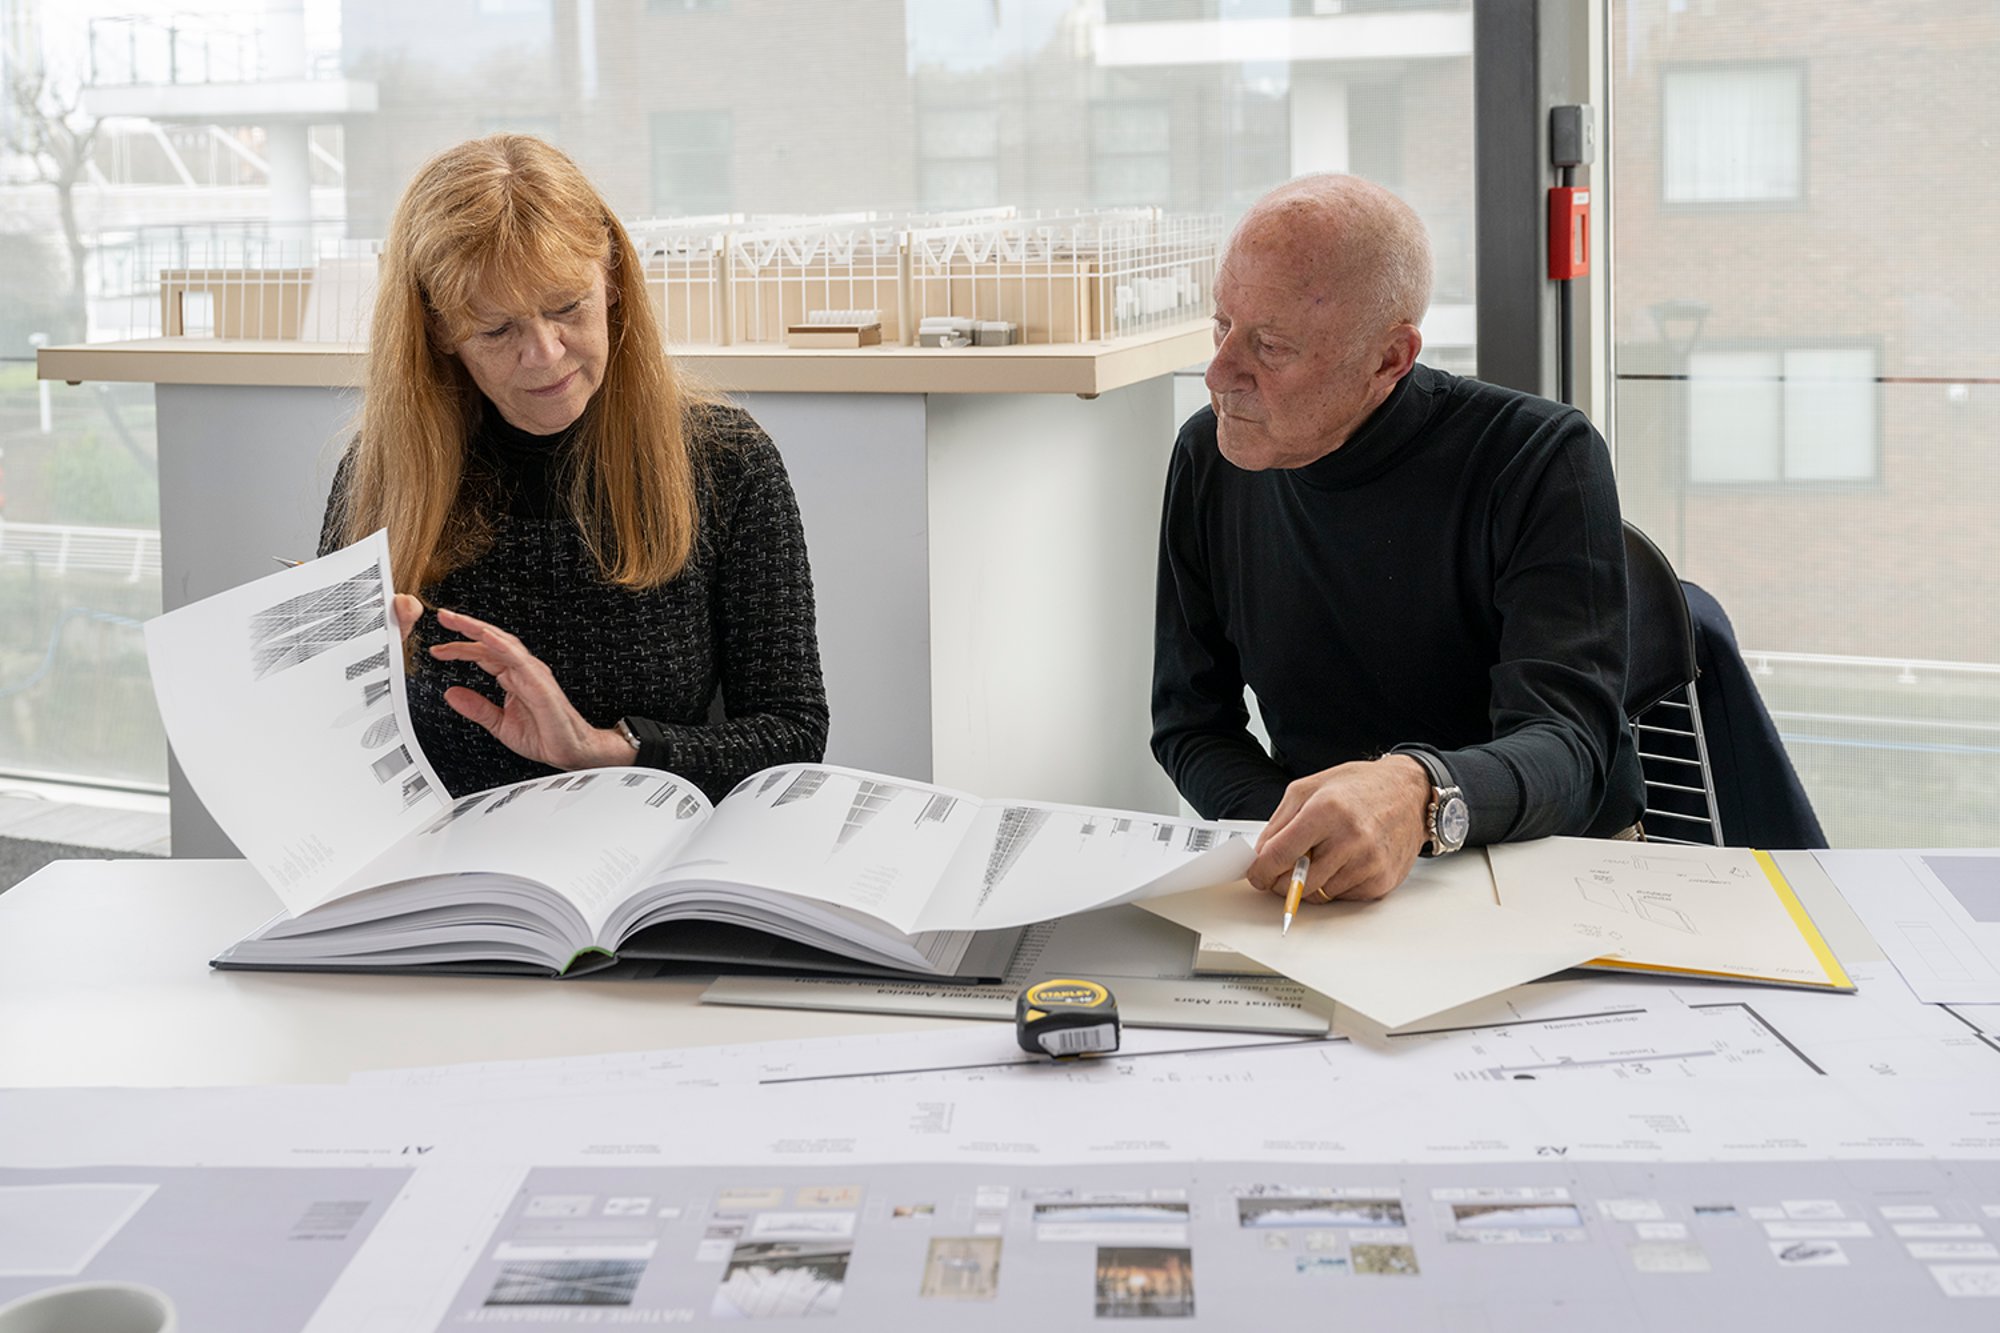 Reviewing projects for 'The Vertical City' in the practice's London studio. This section of the exhibition explores the skyscraper, which Norman Foster says is "emblematic of the modern age city and a reminder that the city is arguably civilisation’s greatest invention." 